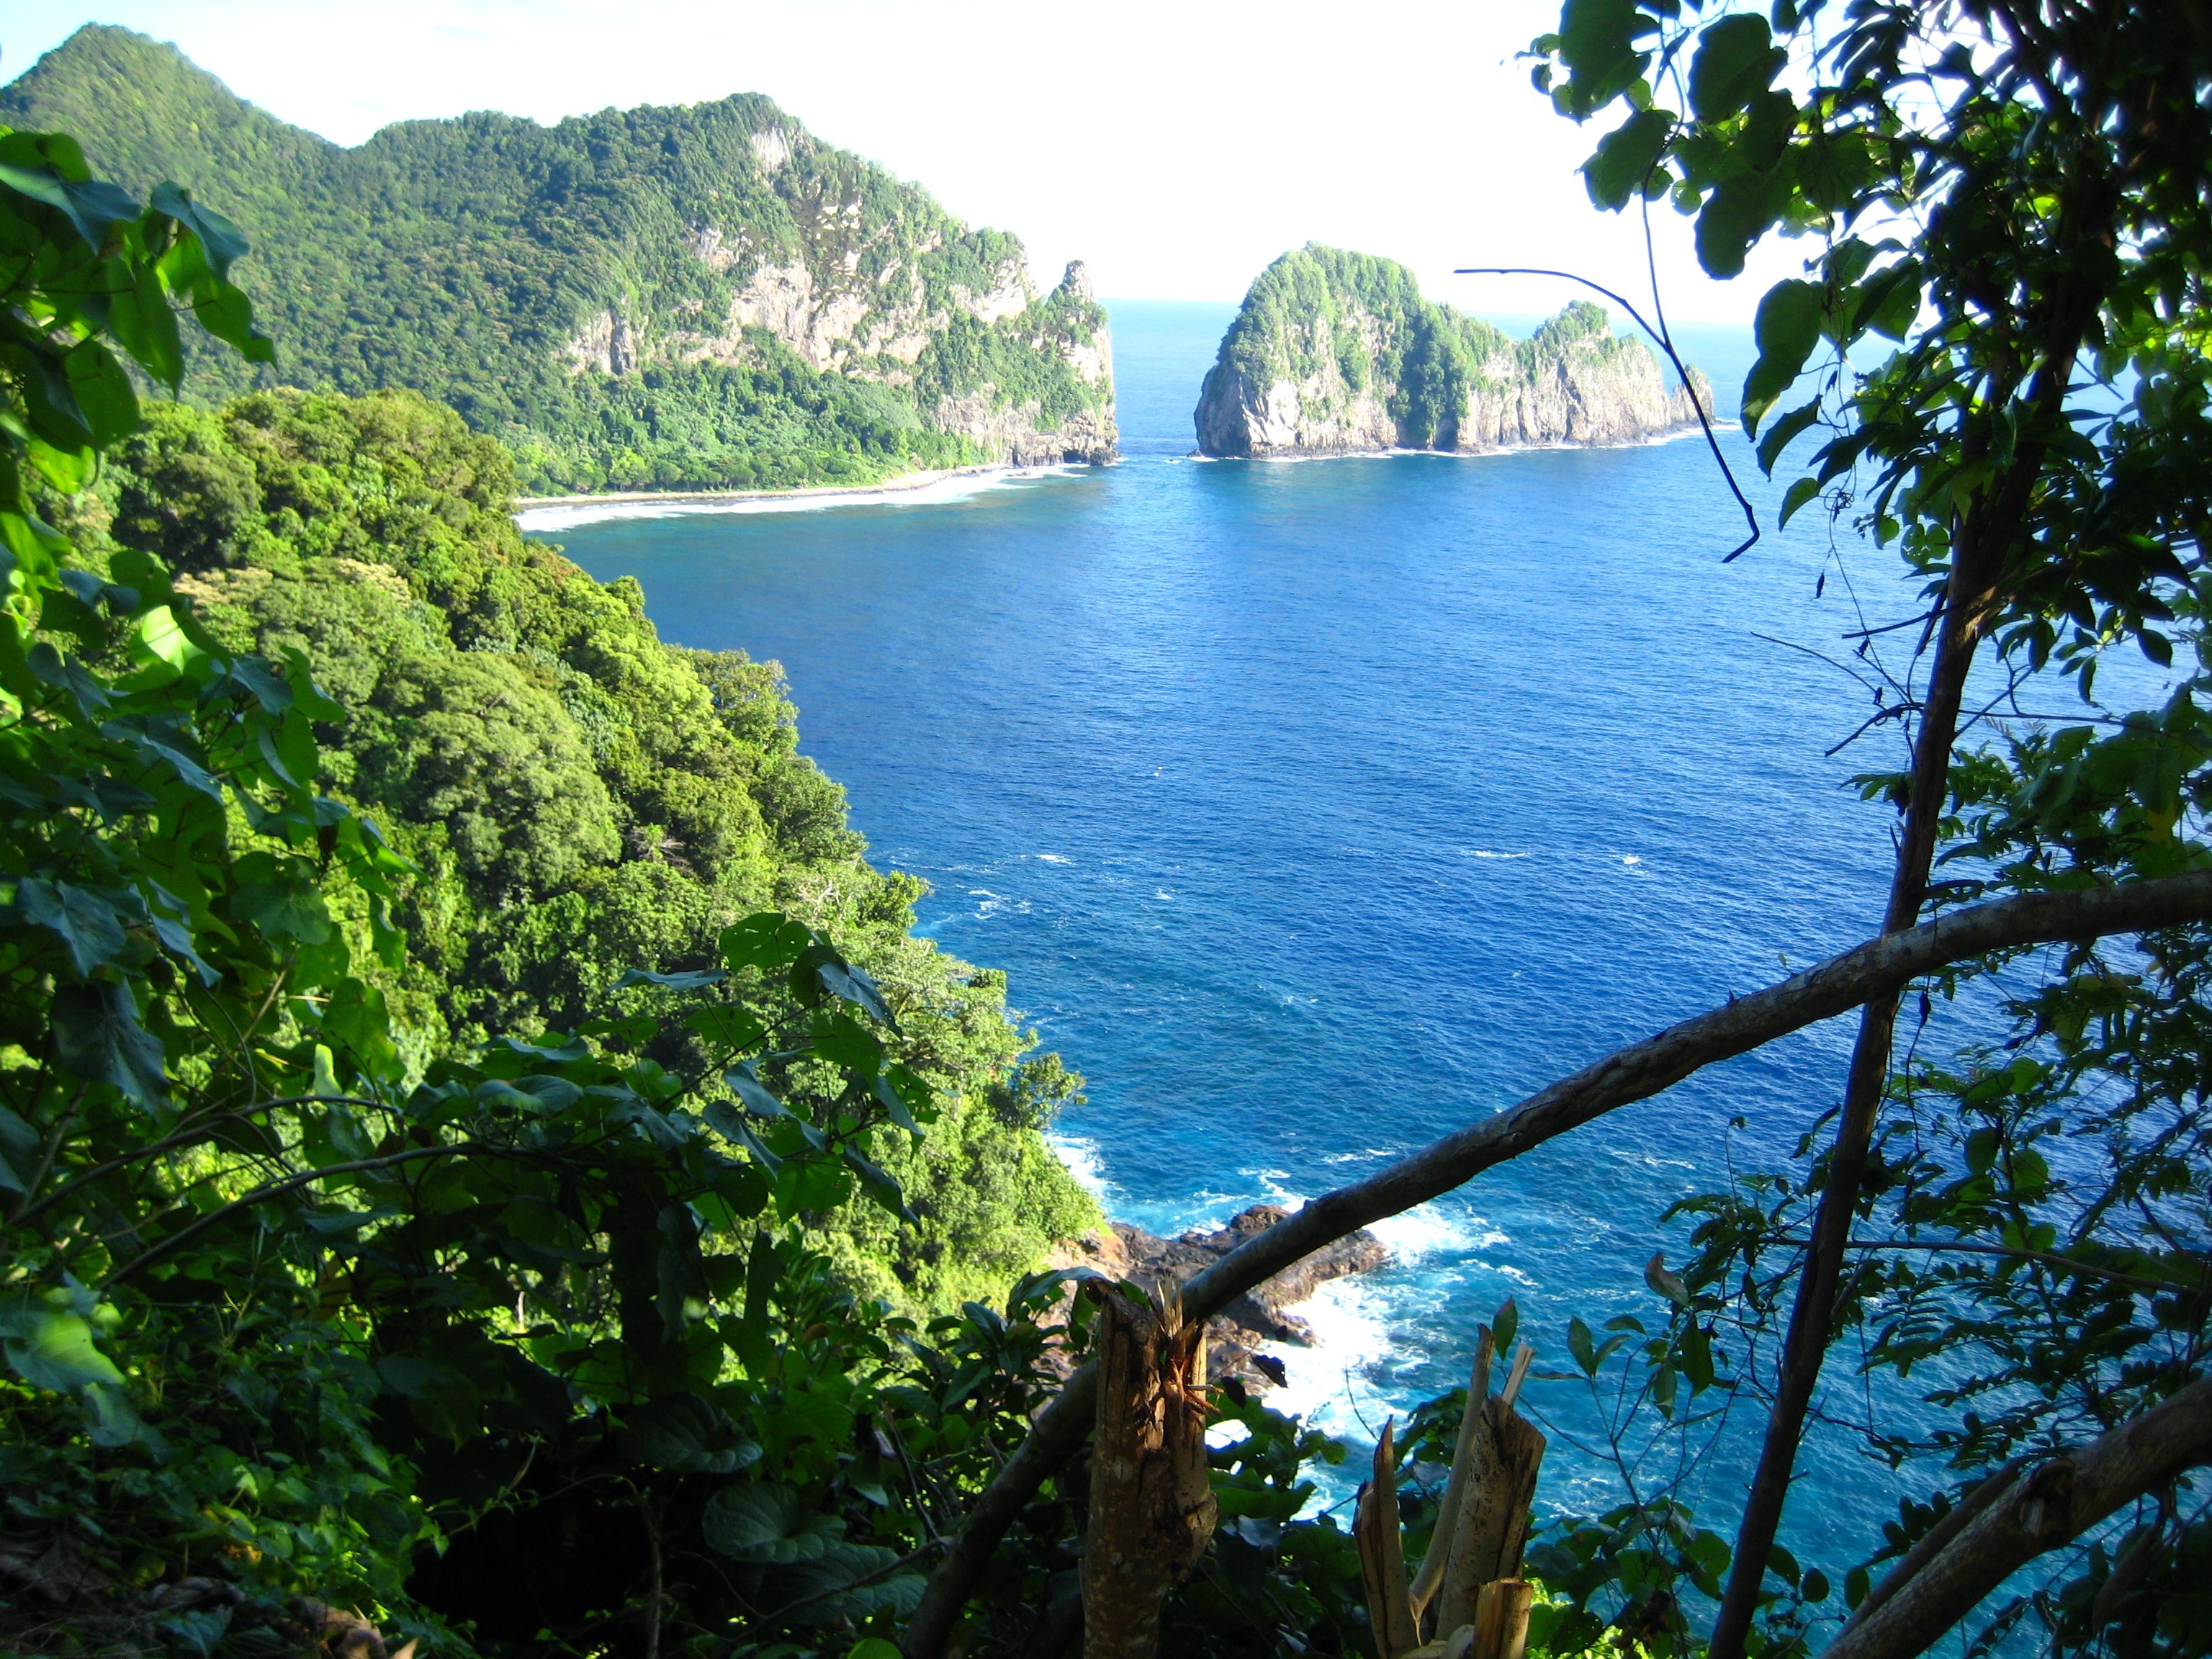 American Samoa: What makes it beautiful. I'd rather be riding